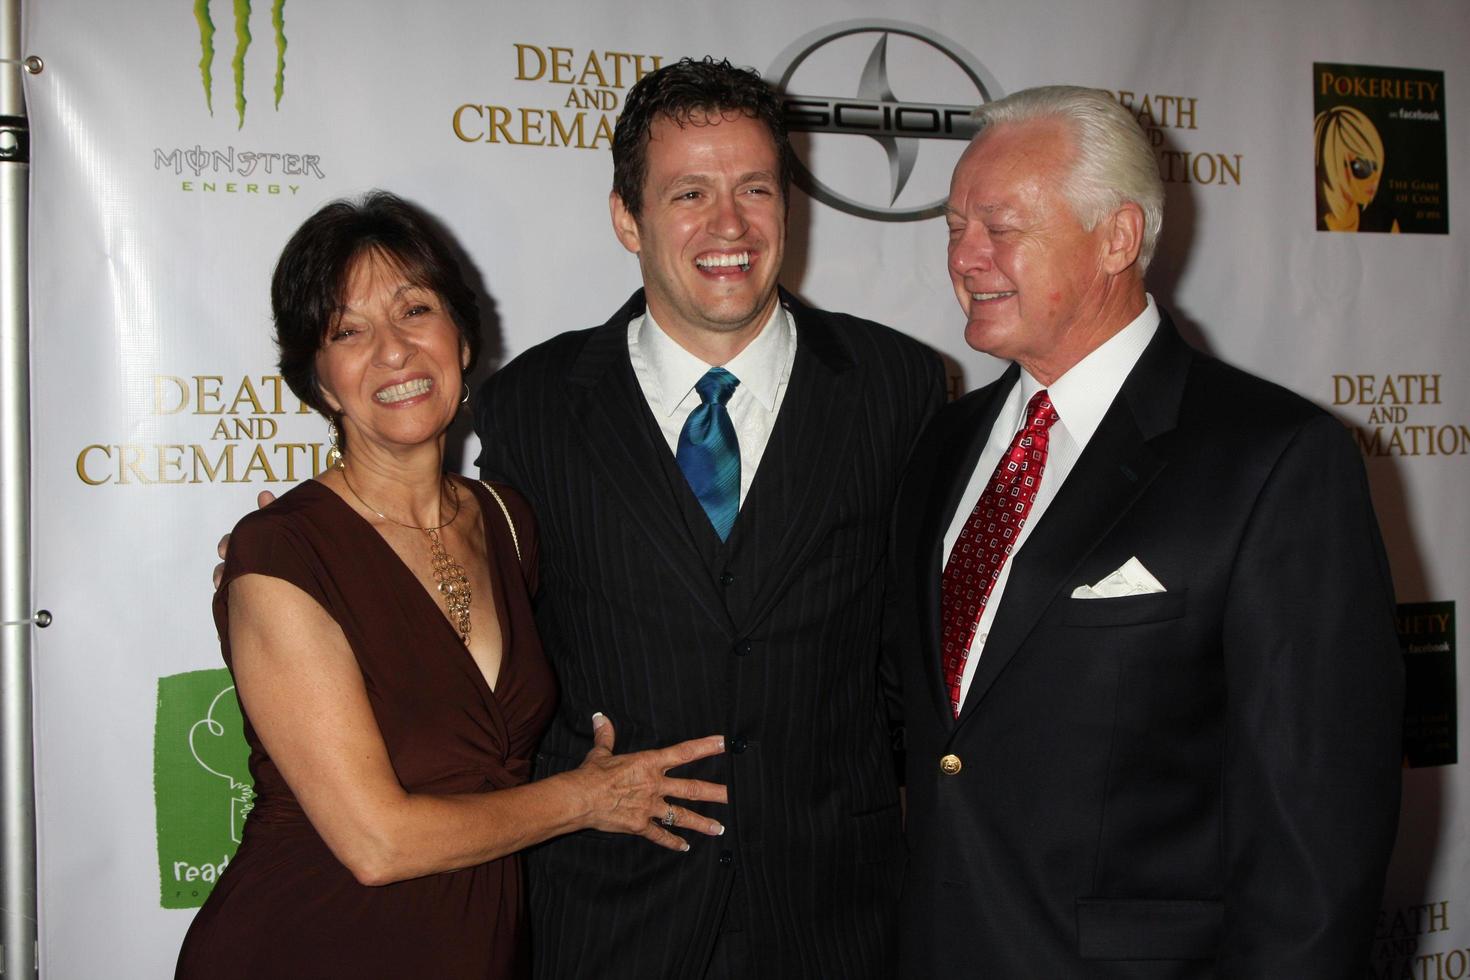 LOS ANGELES, AUG 26 - Tom Malloy and Parents arrives at the Death and Cremation Premiere at 20th Century Fox Studios on August 26, 2010 in Century City, CA photo